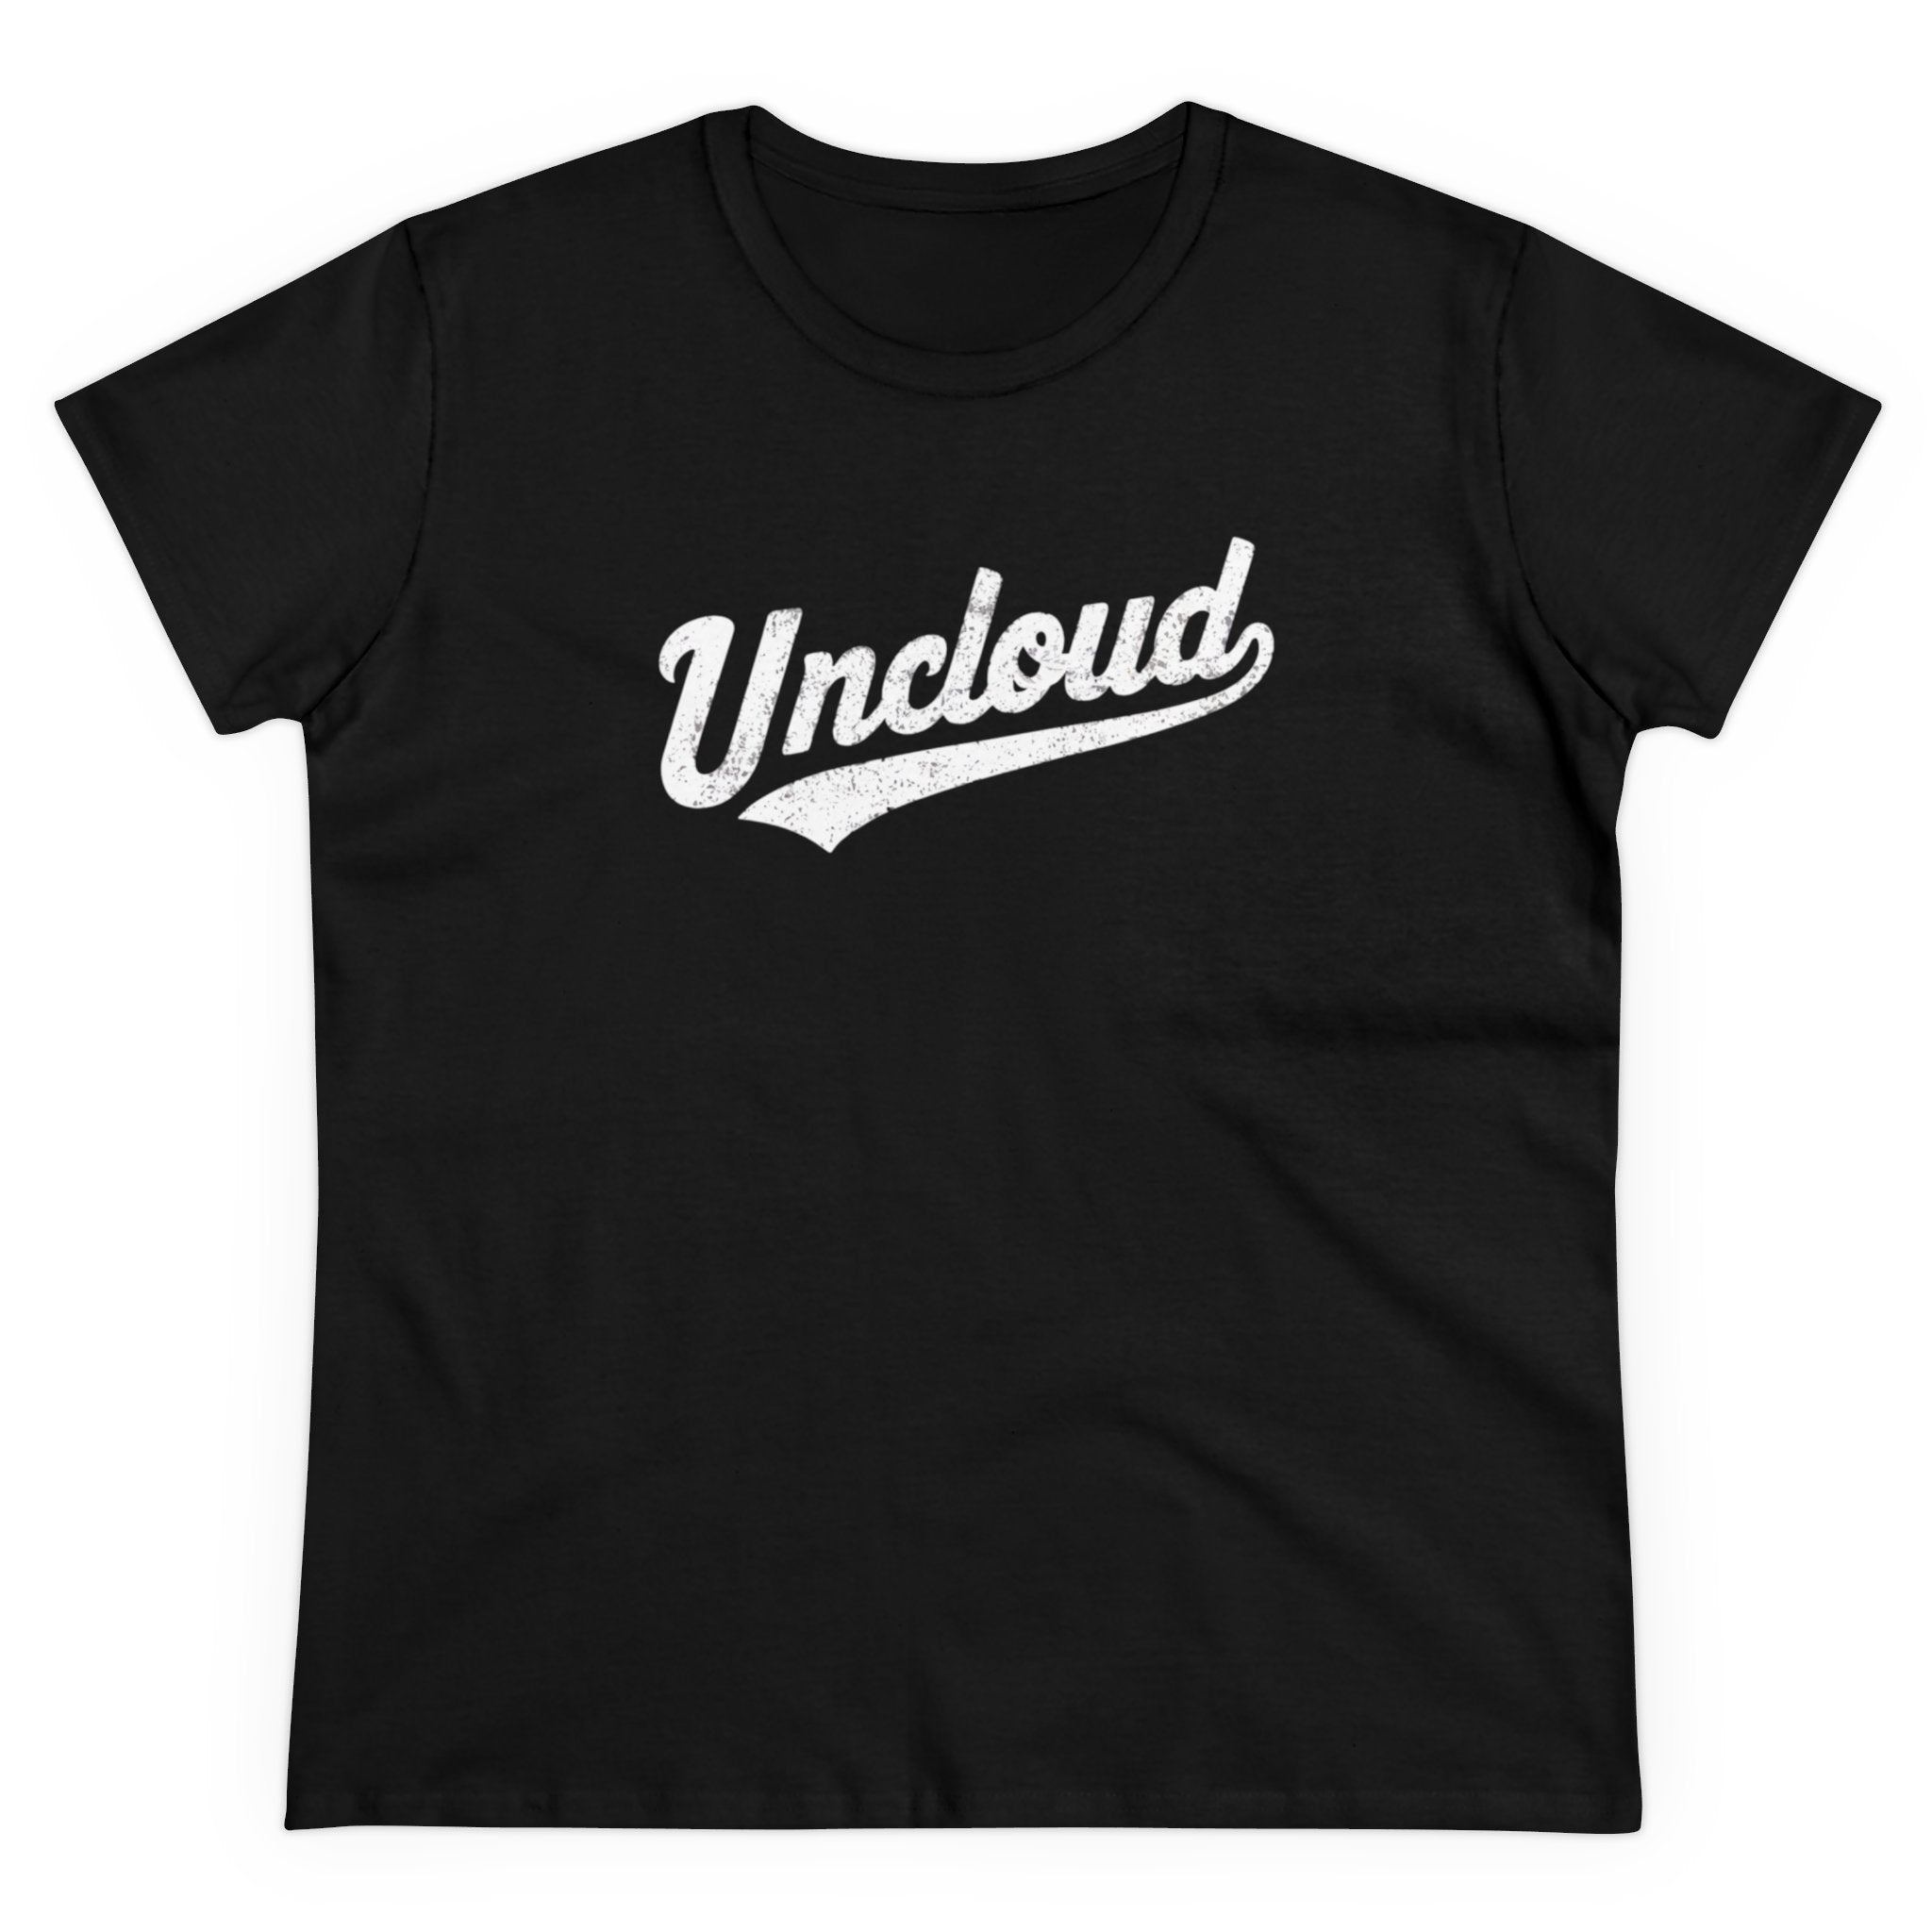 Uncloud - Women's Tee with the word "Uncloud" written in a stylized white script font across the chest, made from soft cotton for ultimate cozy style.